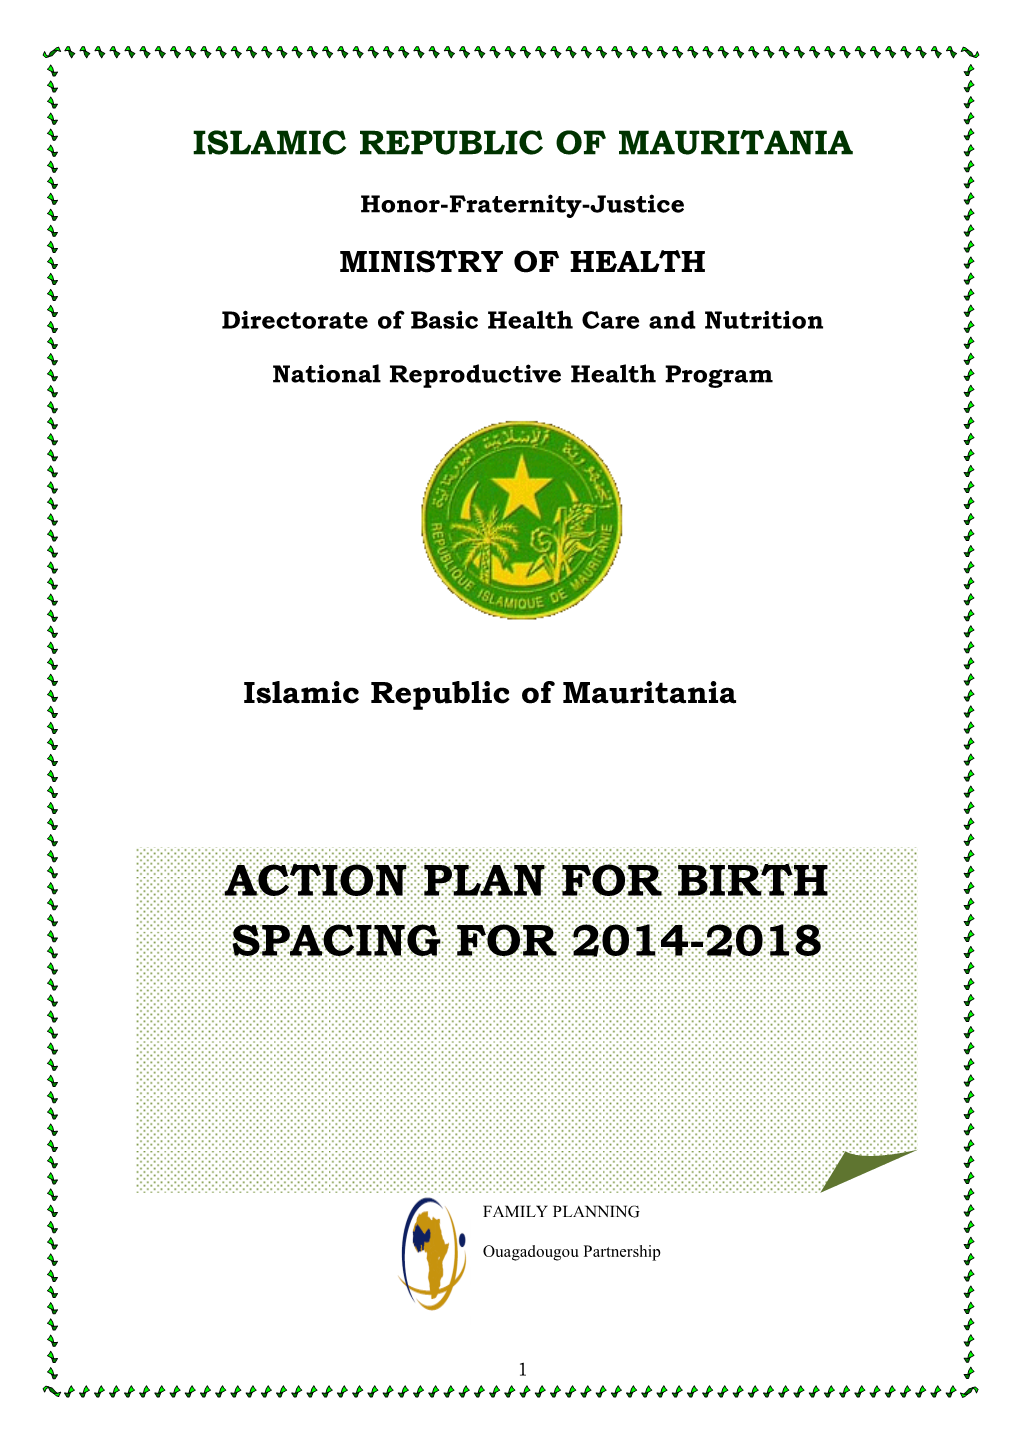 Action Plan for Birth Spacing for 2014-2018